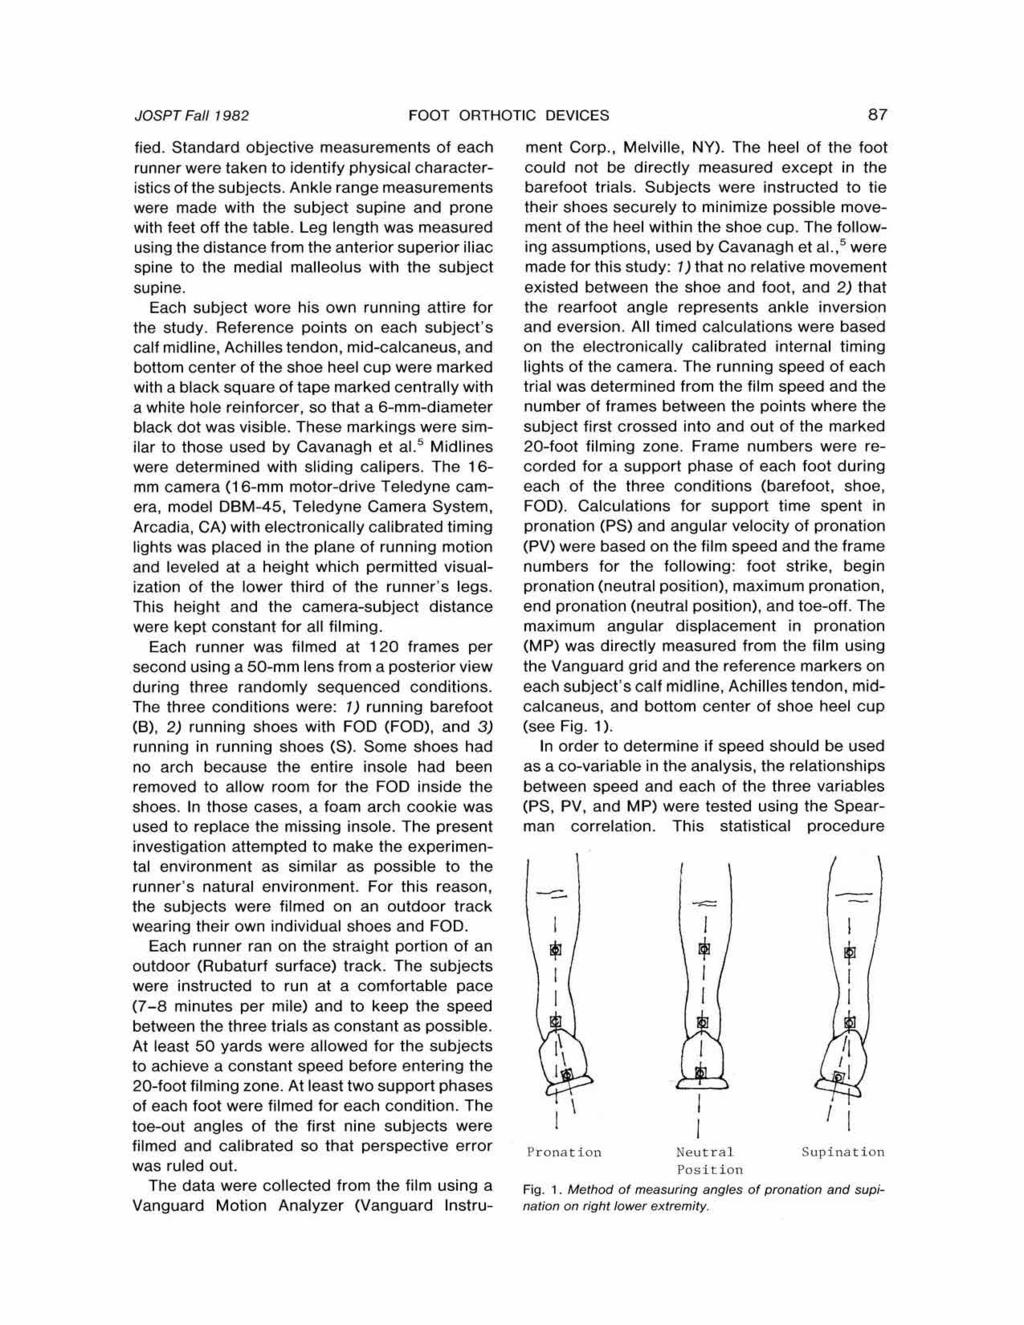 JOSPT Fall 1982 FOOT ORTHOTIC DEVICES 8 7 fied. Standard objective measurements of each runner were taken to identify physical characteristics of the subjects.